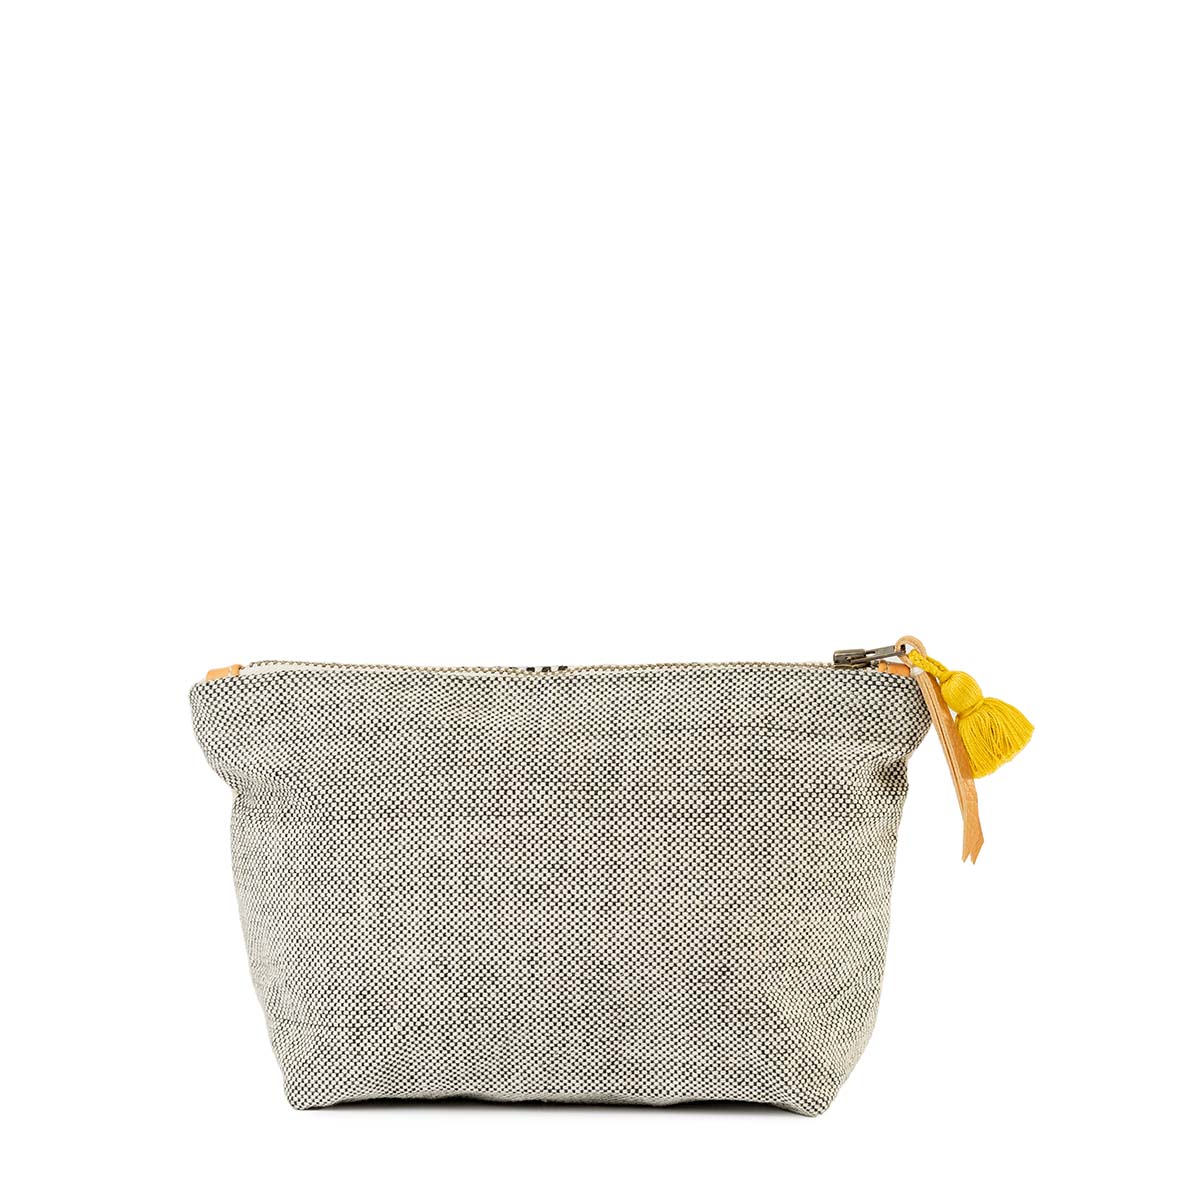 Back of the hand woven artisan Mini Cristina Cosmetic Pouch in Tourmaline pattern. The back has a woven grey color. It has a mini yellow tassel and leather zipper pull.